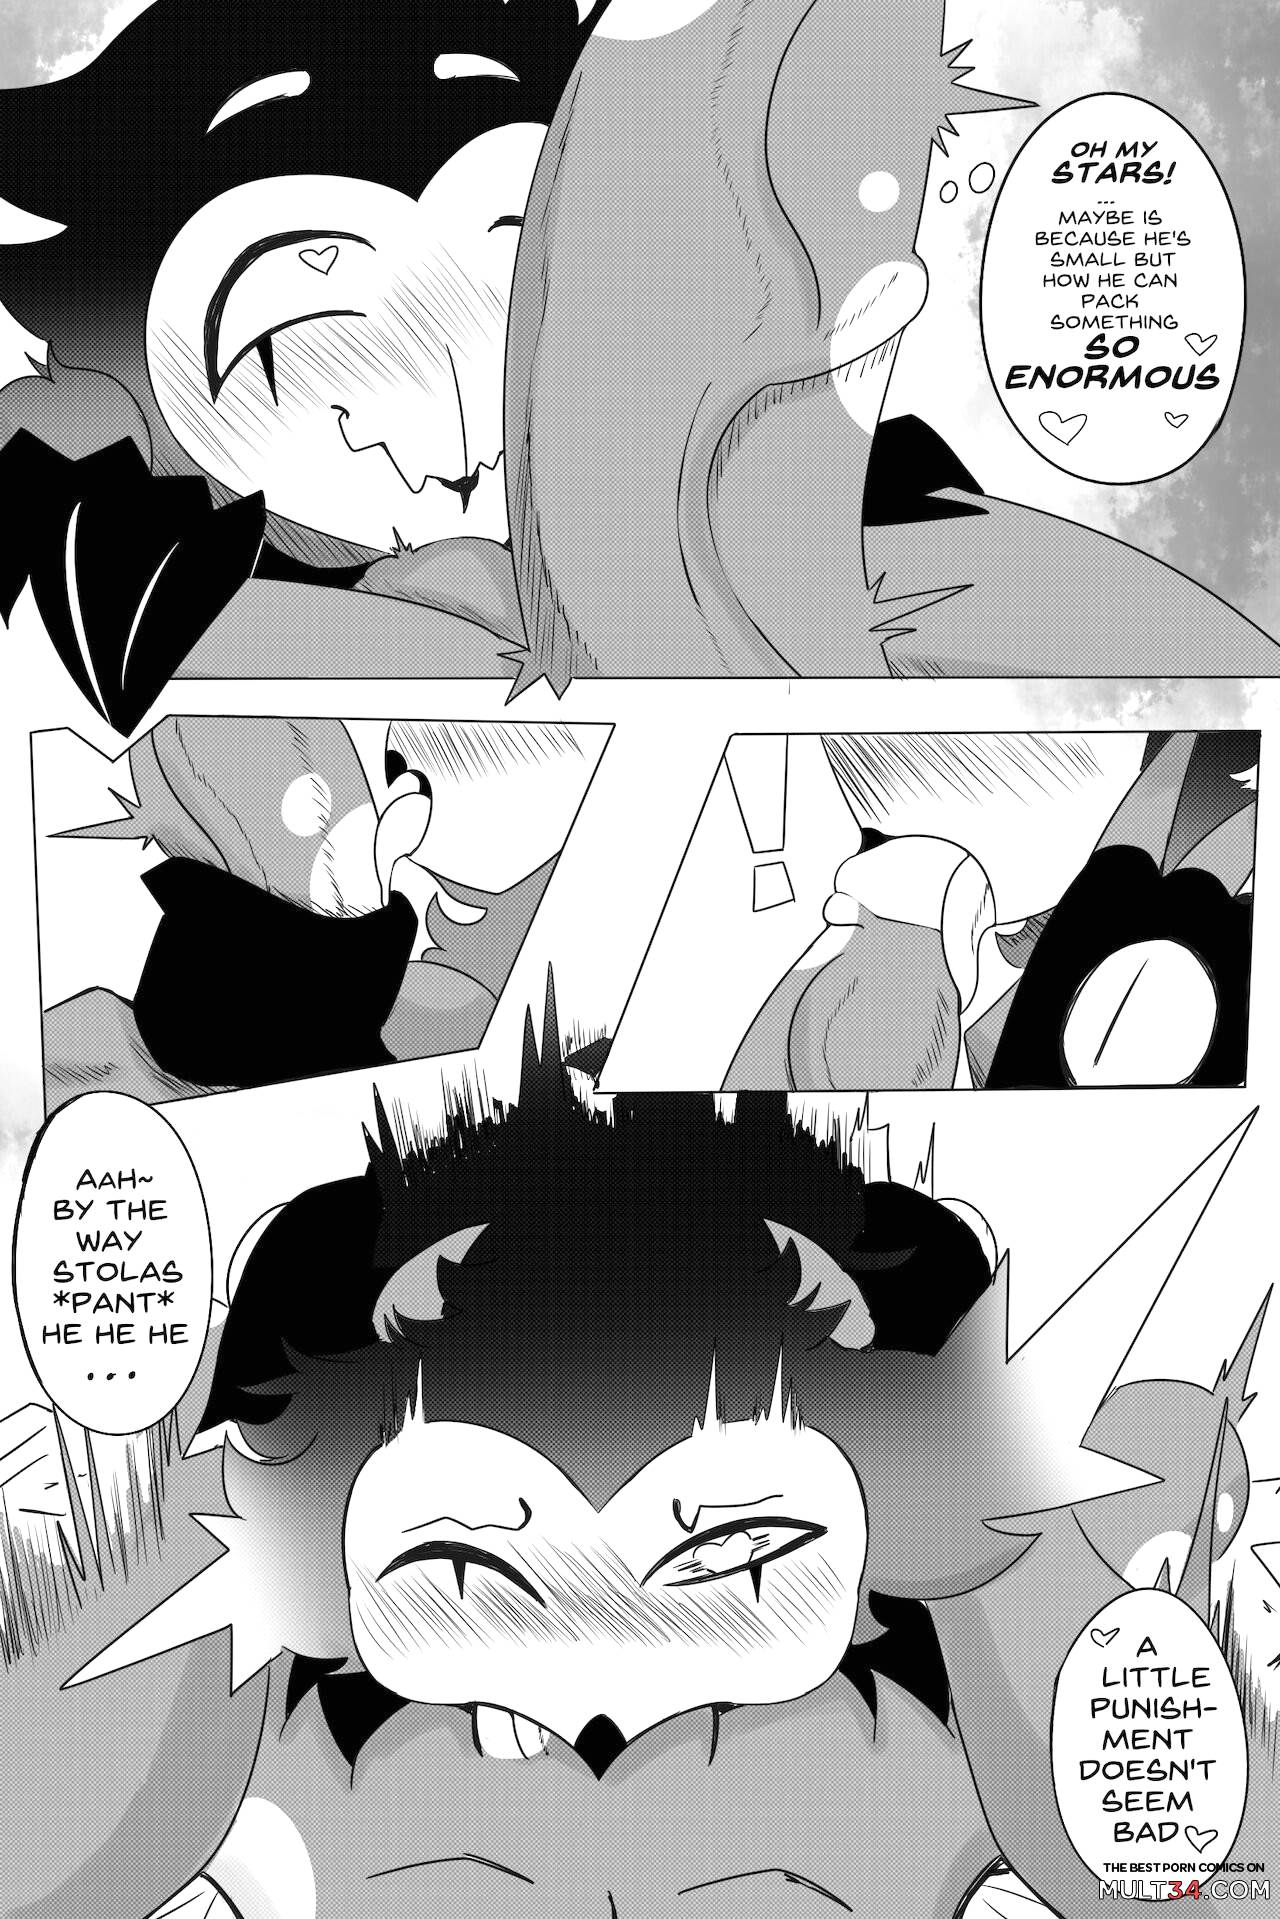 Blitzy page 15